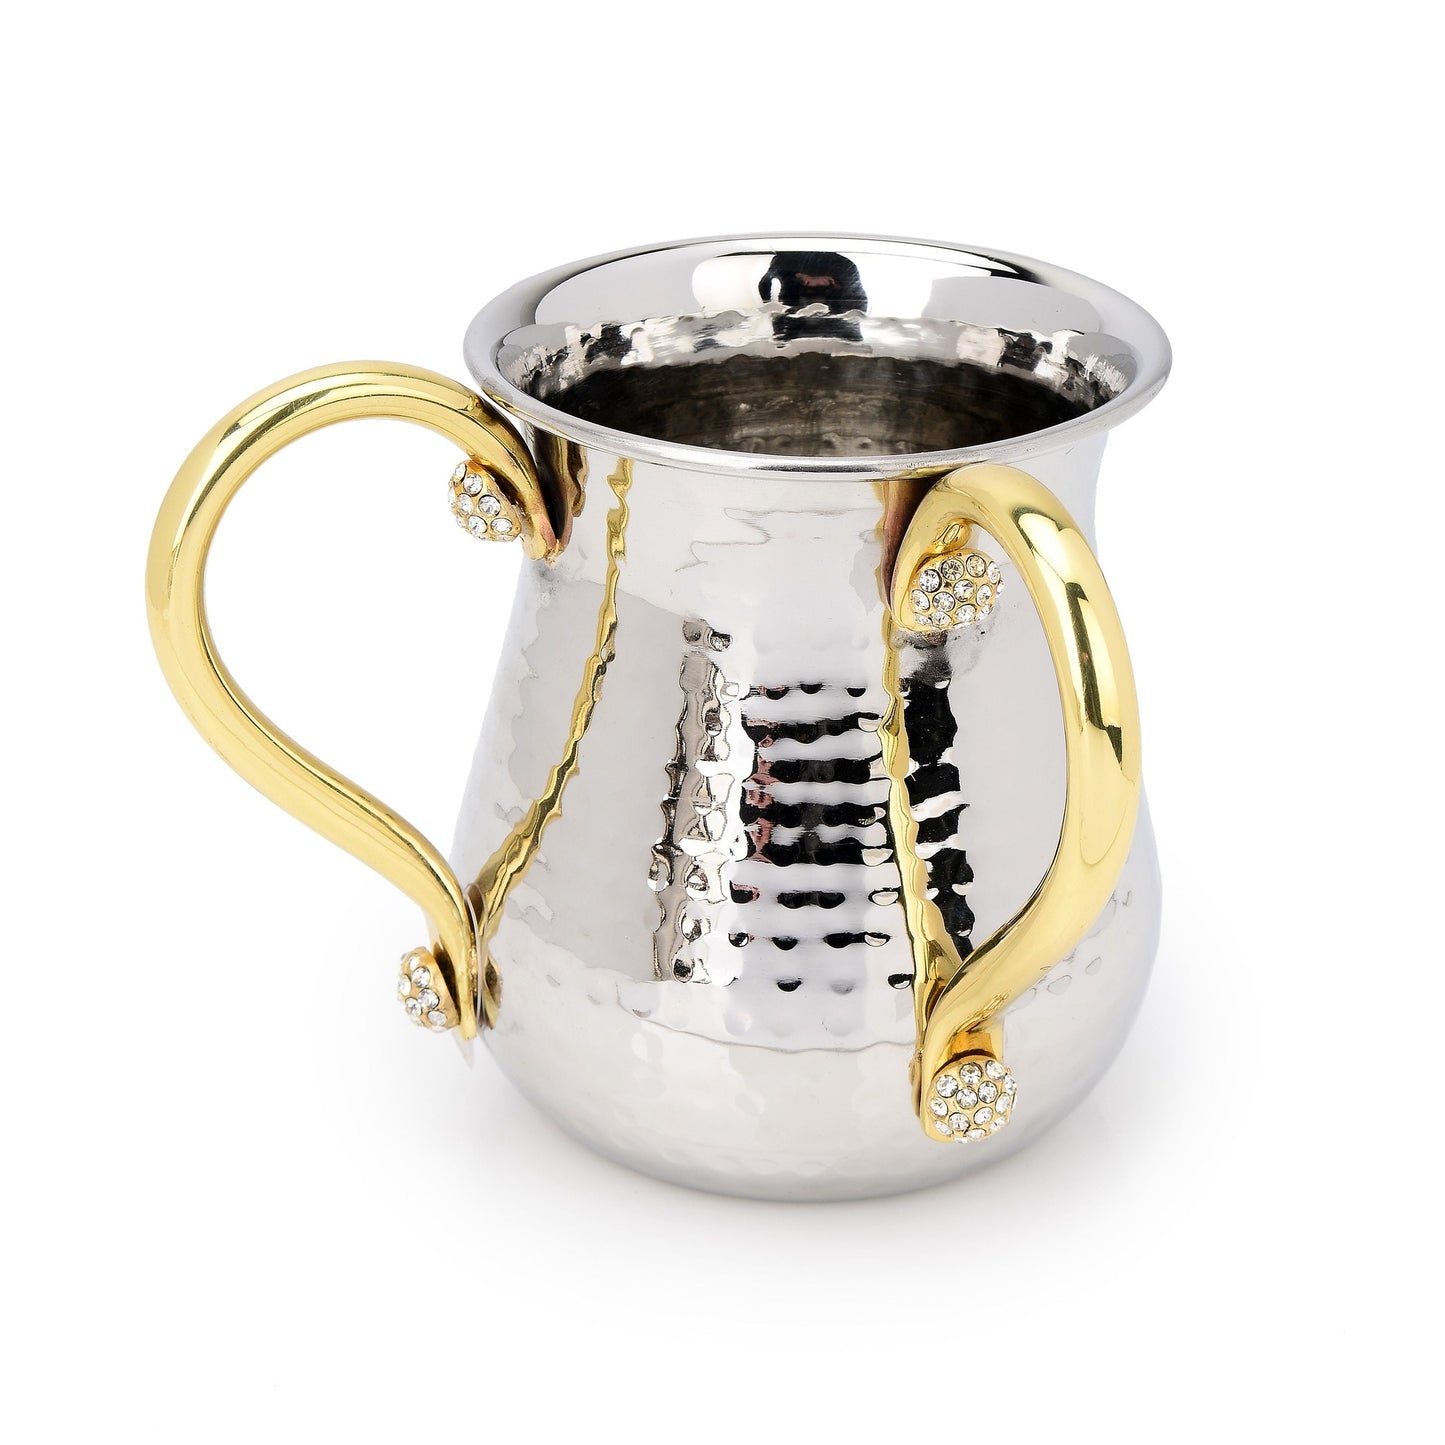 Classic Touch Hammered Stainless Steel Wash Cup With Gold Handles, 5.5" x 6"